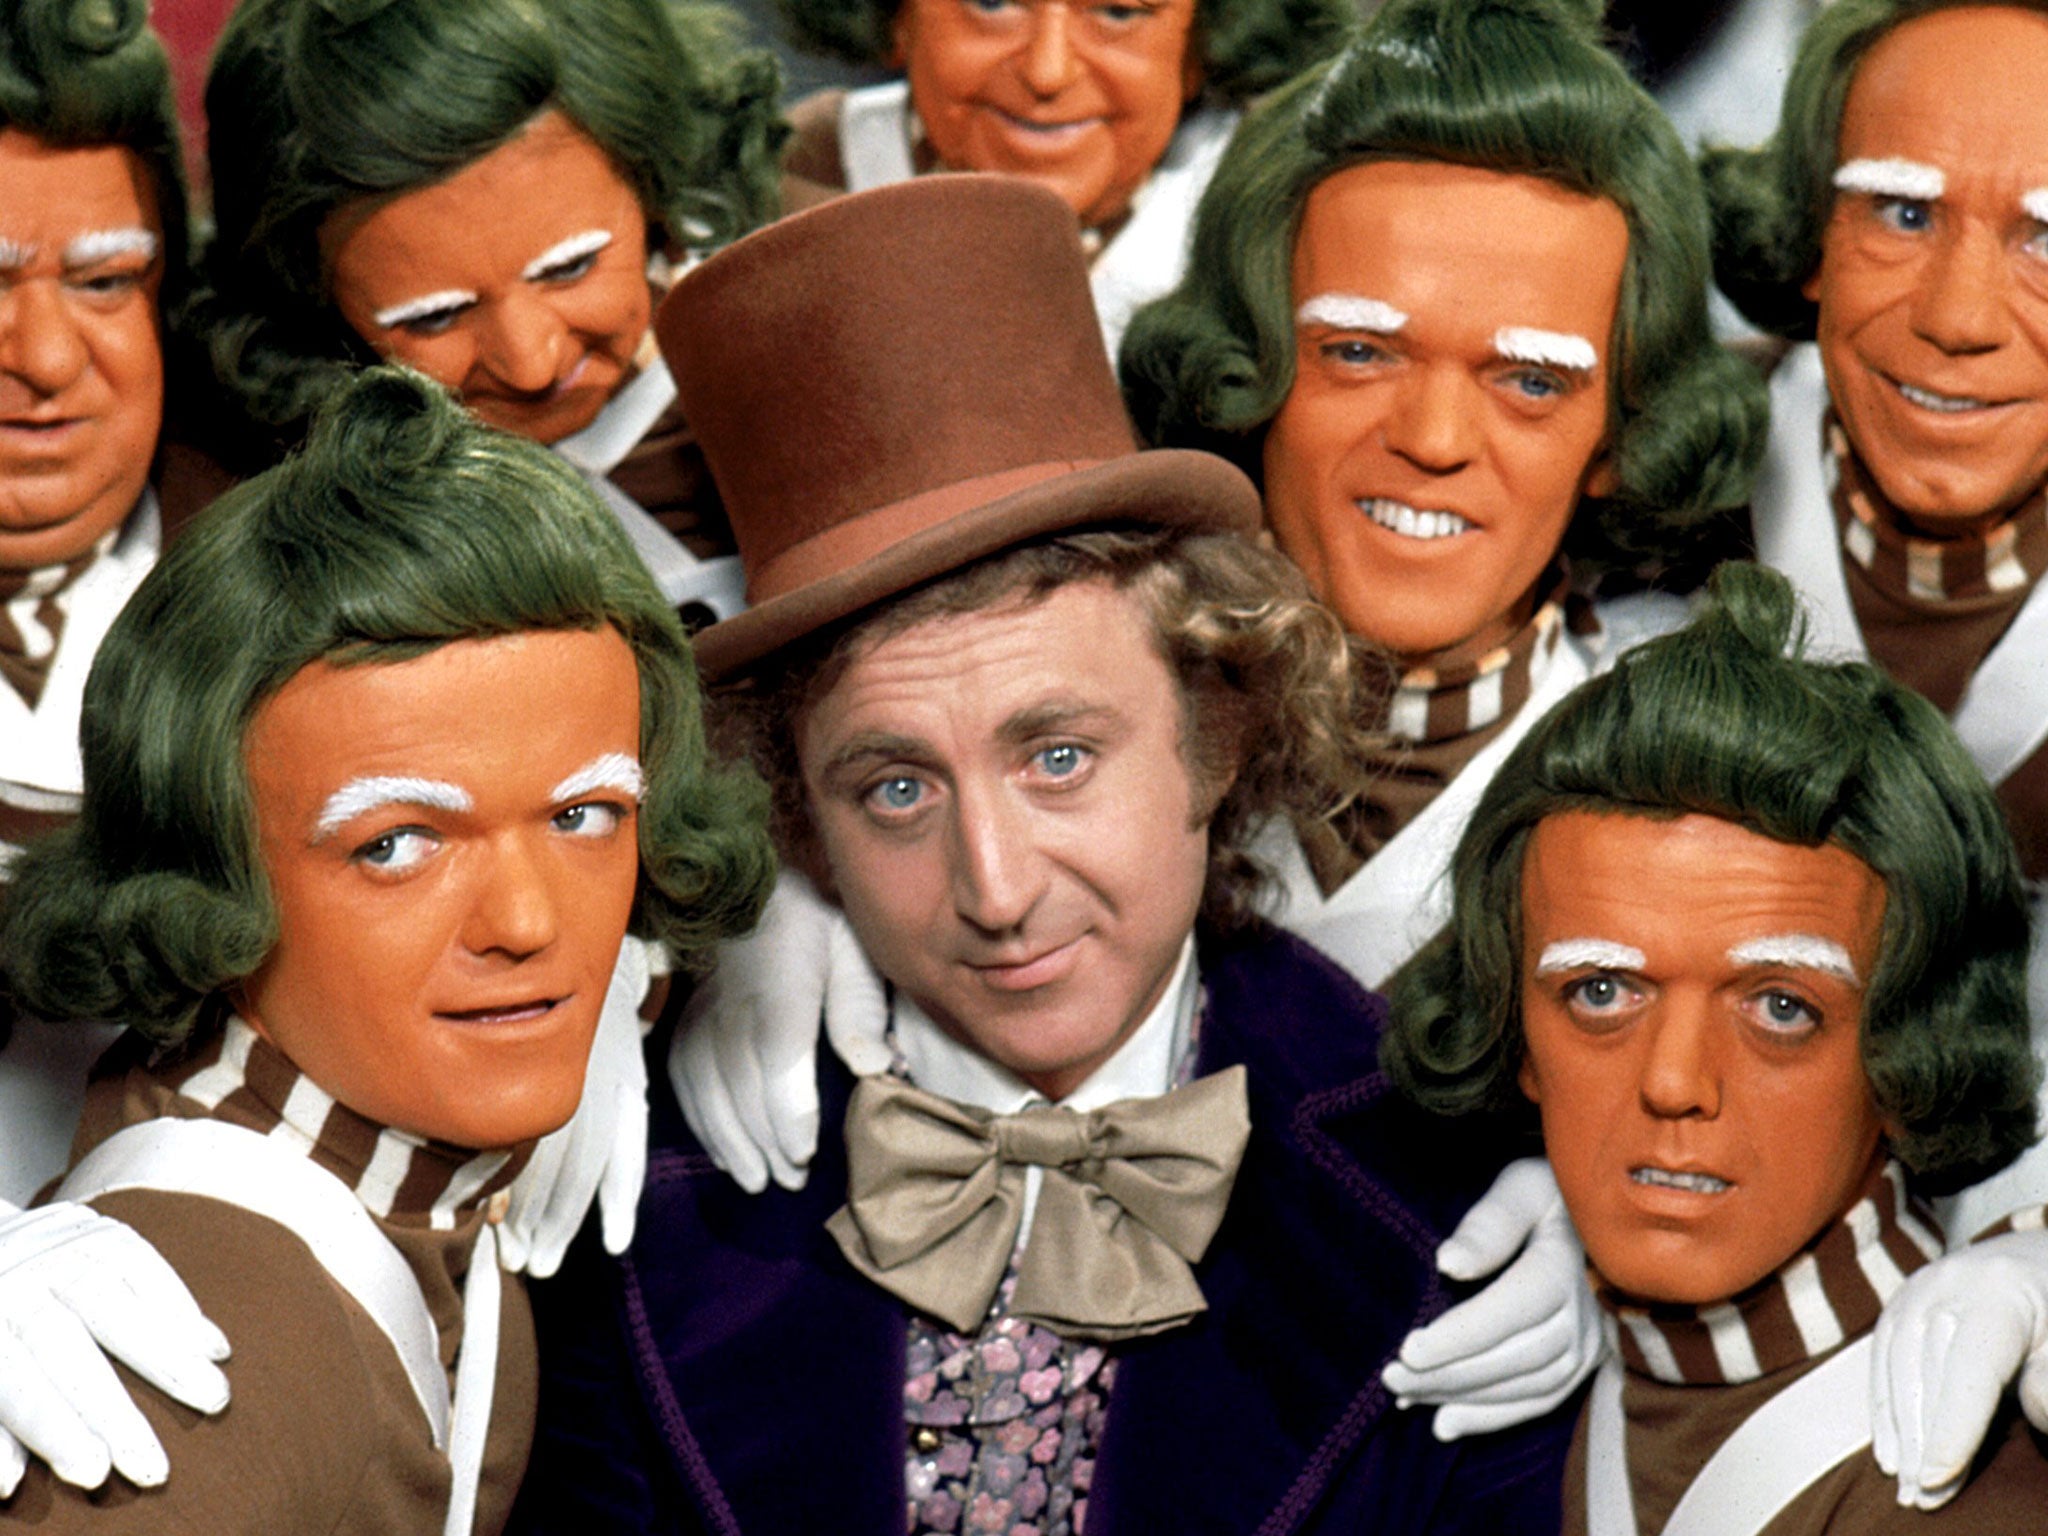 willy wonka experience ends in tears as police called out and furious families demand refunds